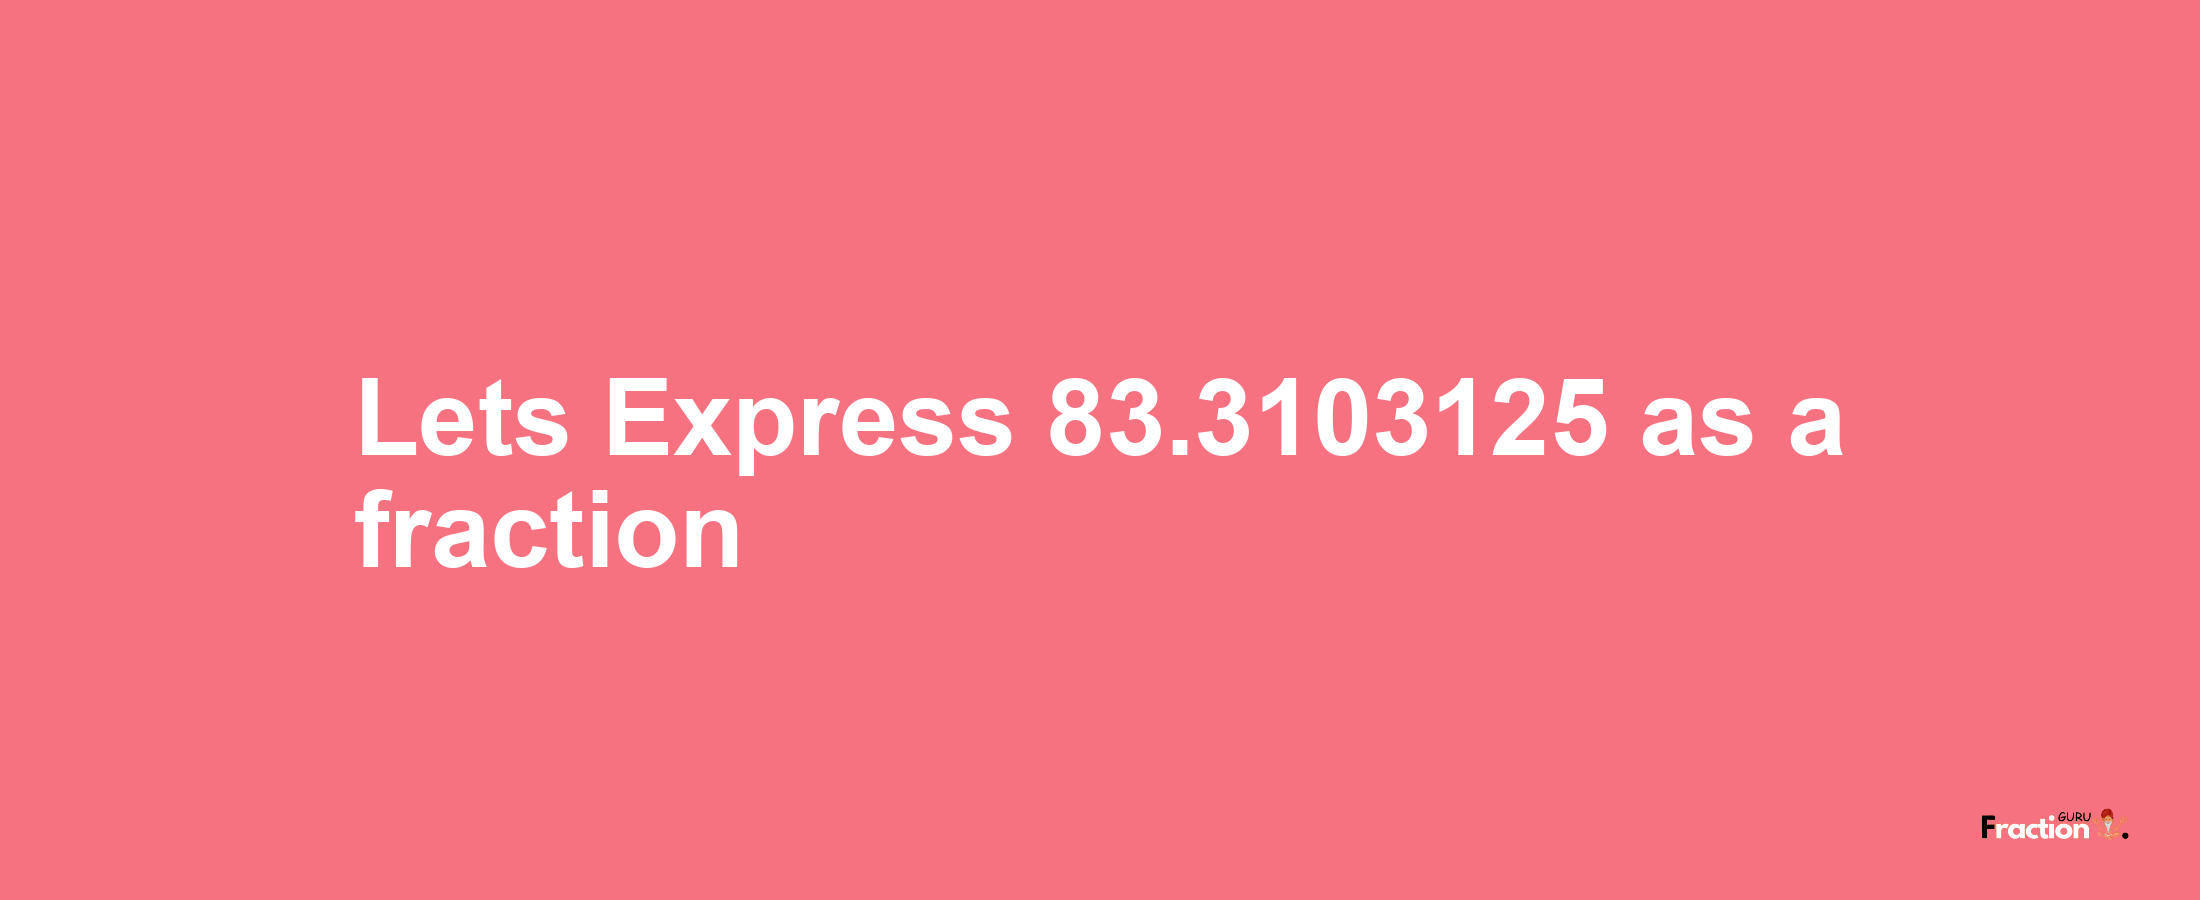 Lets Express 83.3103125 as afraction